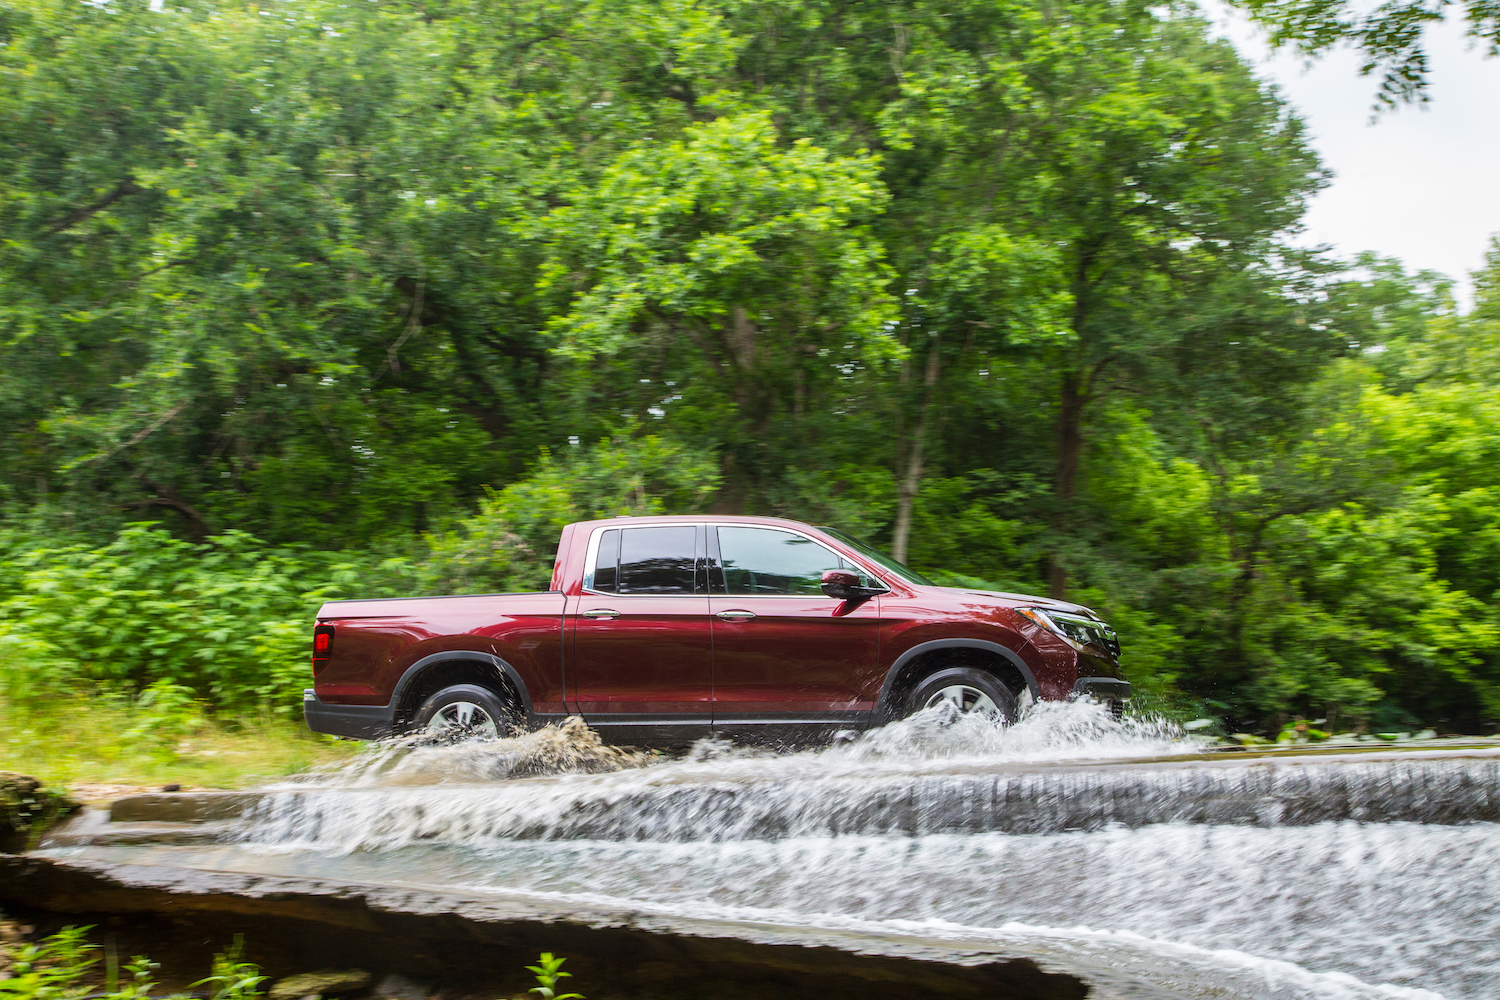 A Honda Ridgeline pickup truck fording a river, with trees visible in the background.